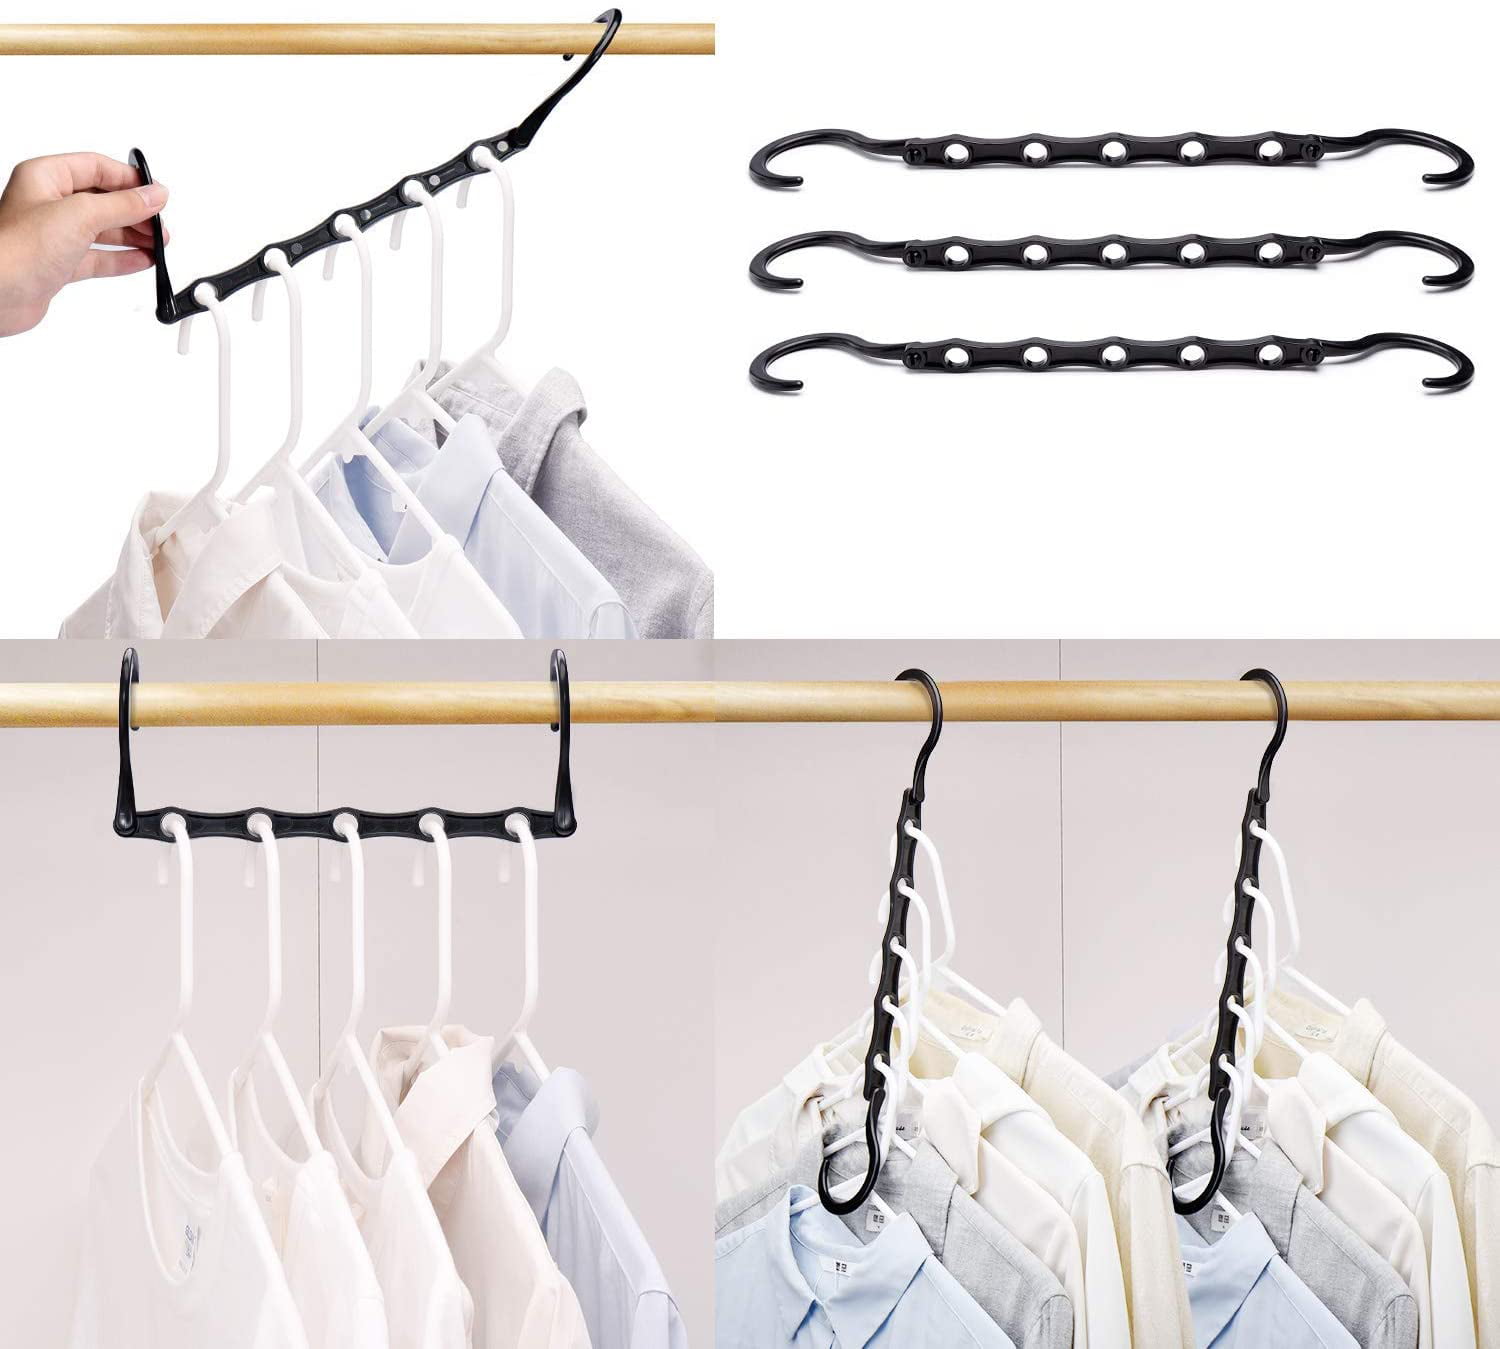 Magic Hangers As Seen on Tv Save Closet Space Clothes Organizer Purse Set of 10 Lifetime Warranty 